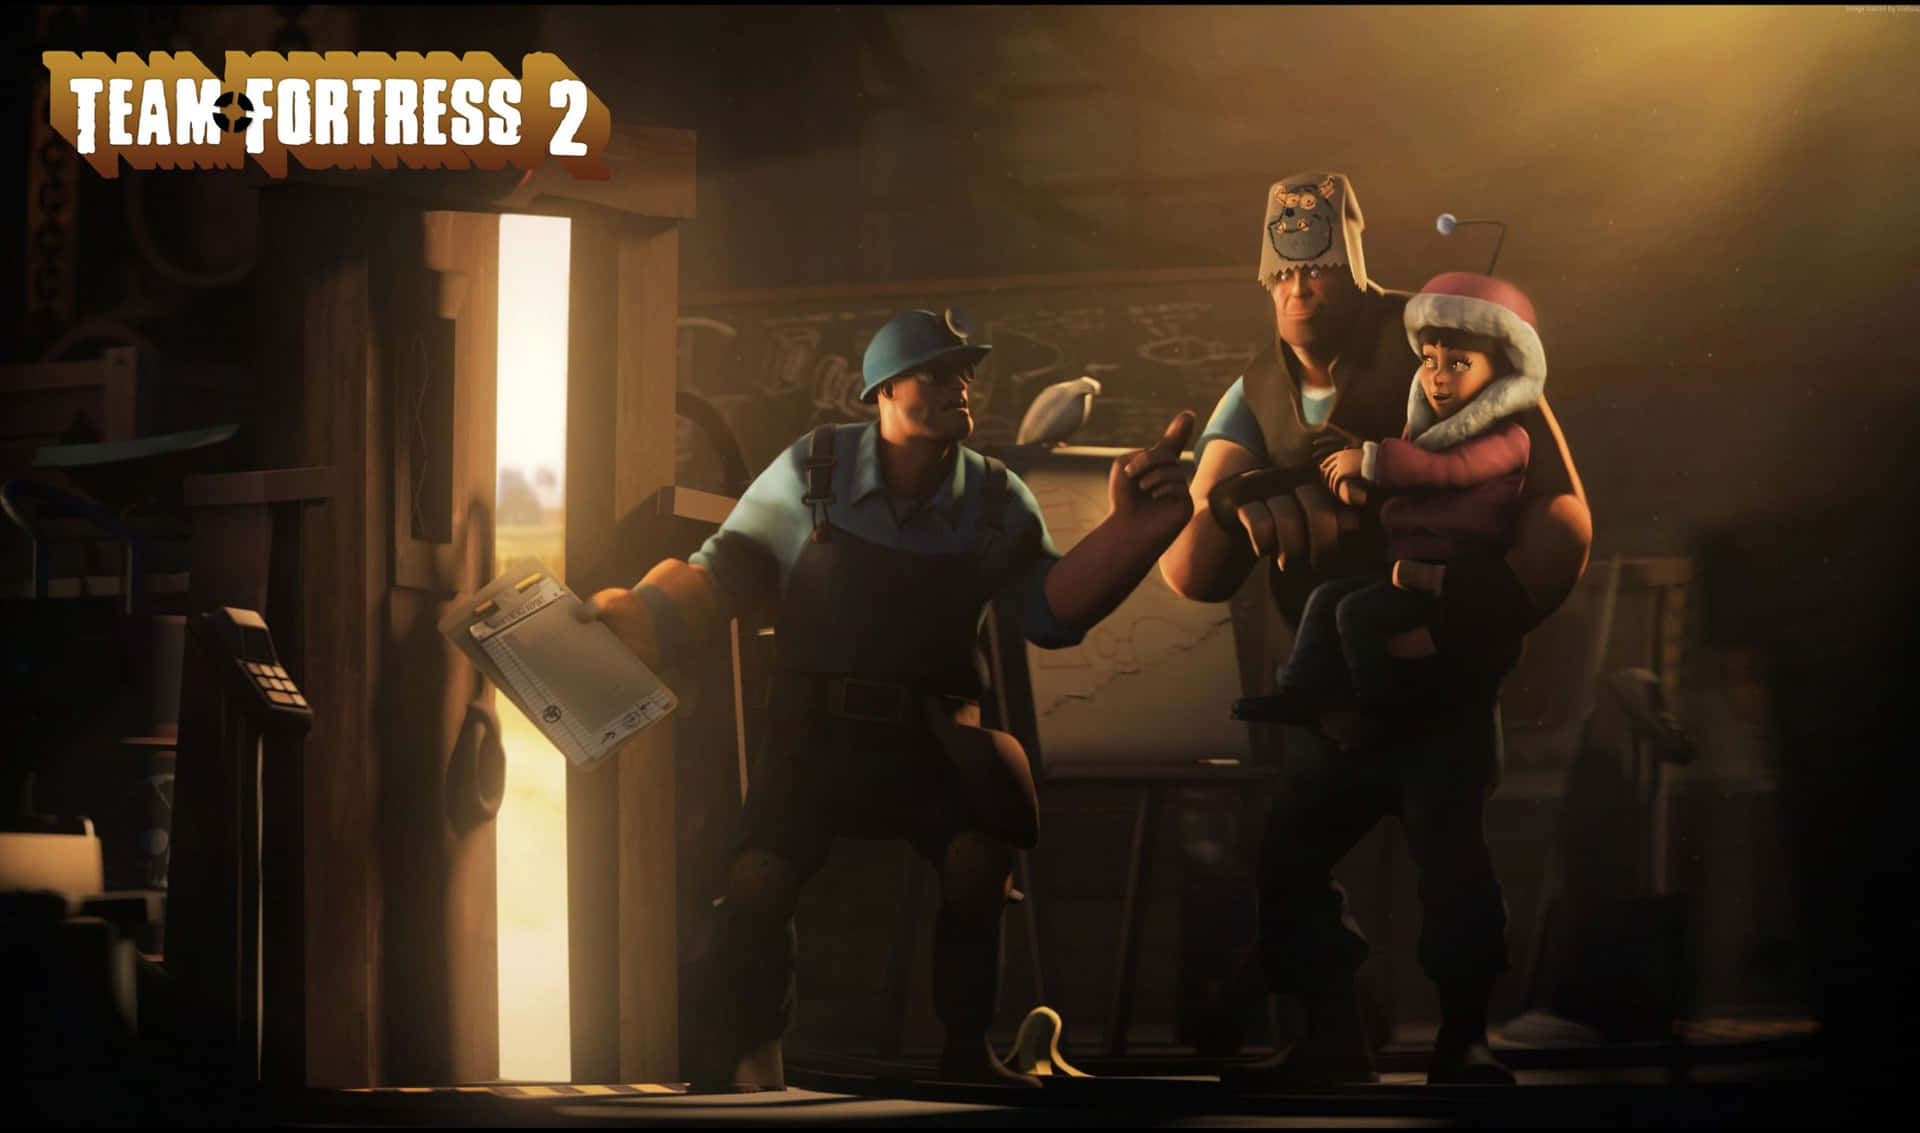 Enjoy the world of Team Fortress 2 on your PC with this amazing 2440 x 1440 background.